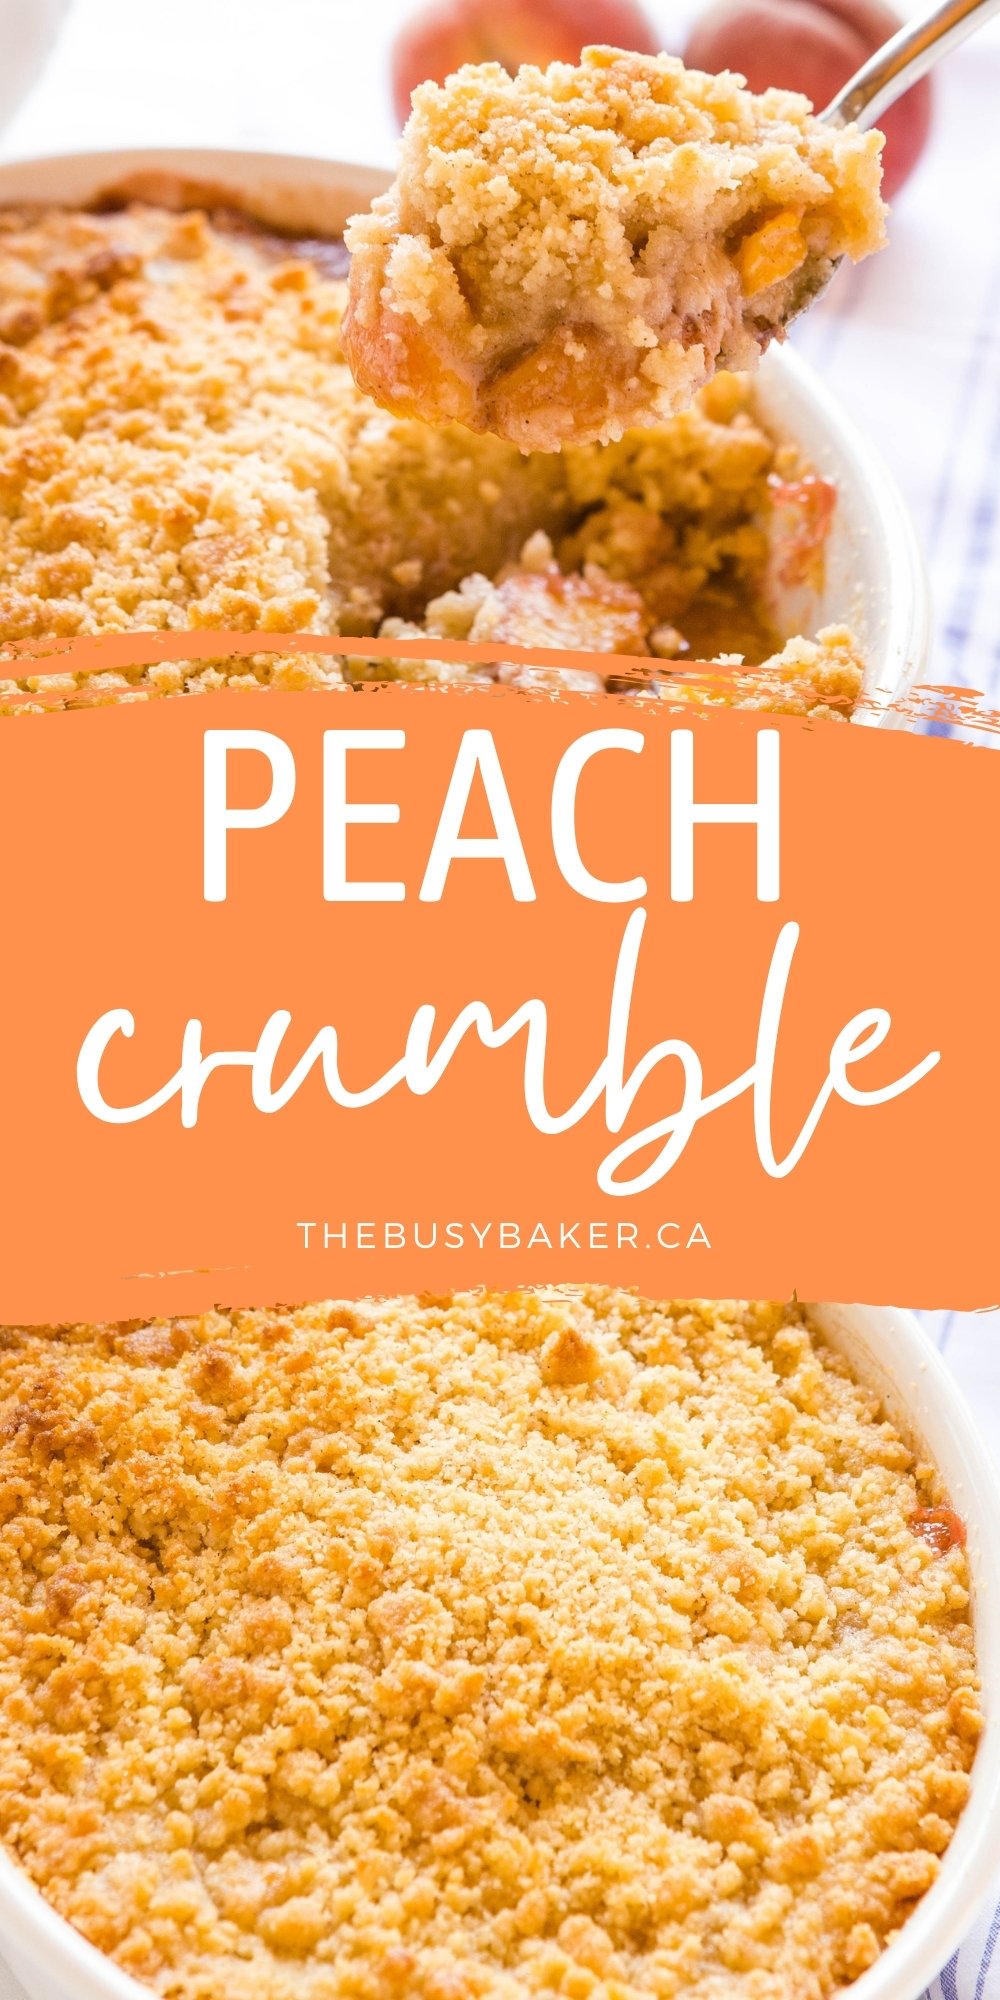 This Fresh Homemade Peach Crumble is the perfect sweet and delicious fruit-packed dessert made with fresh peaches, baked to perfection with the best crumble topping. Recipe from thebusybaker.ca! #peachcrumble #peachdessert #fruitcrisp #fruitcrumble #summer #dessert #baking via @busybakerblog